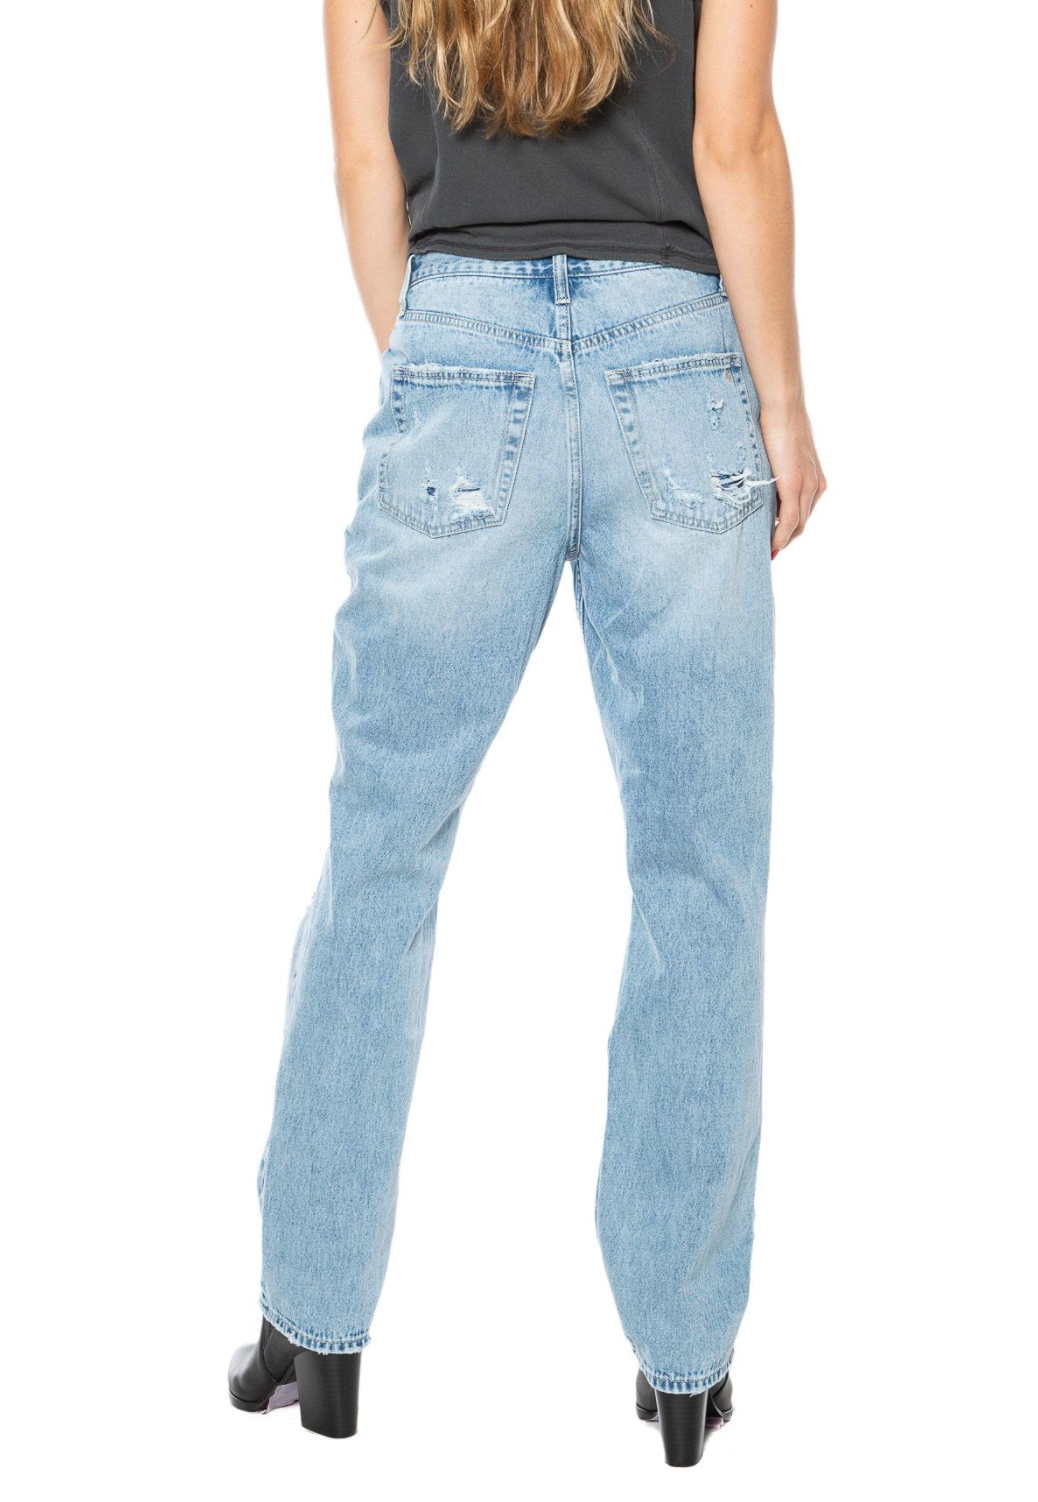 Juicy Couture Relaxed Jean